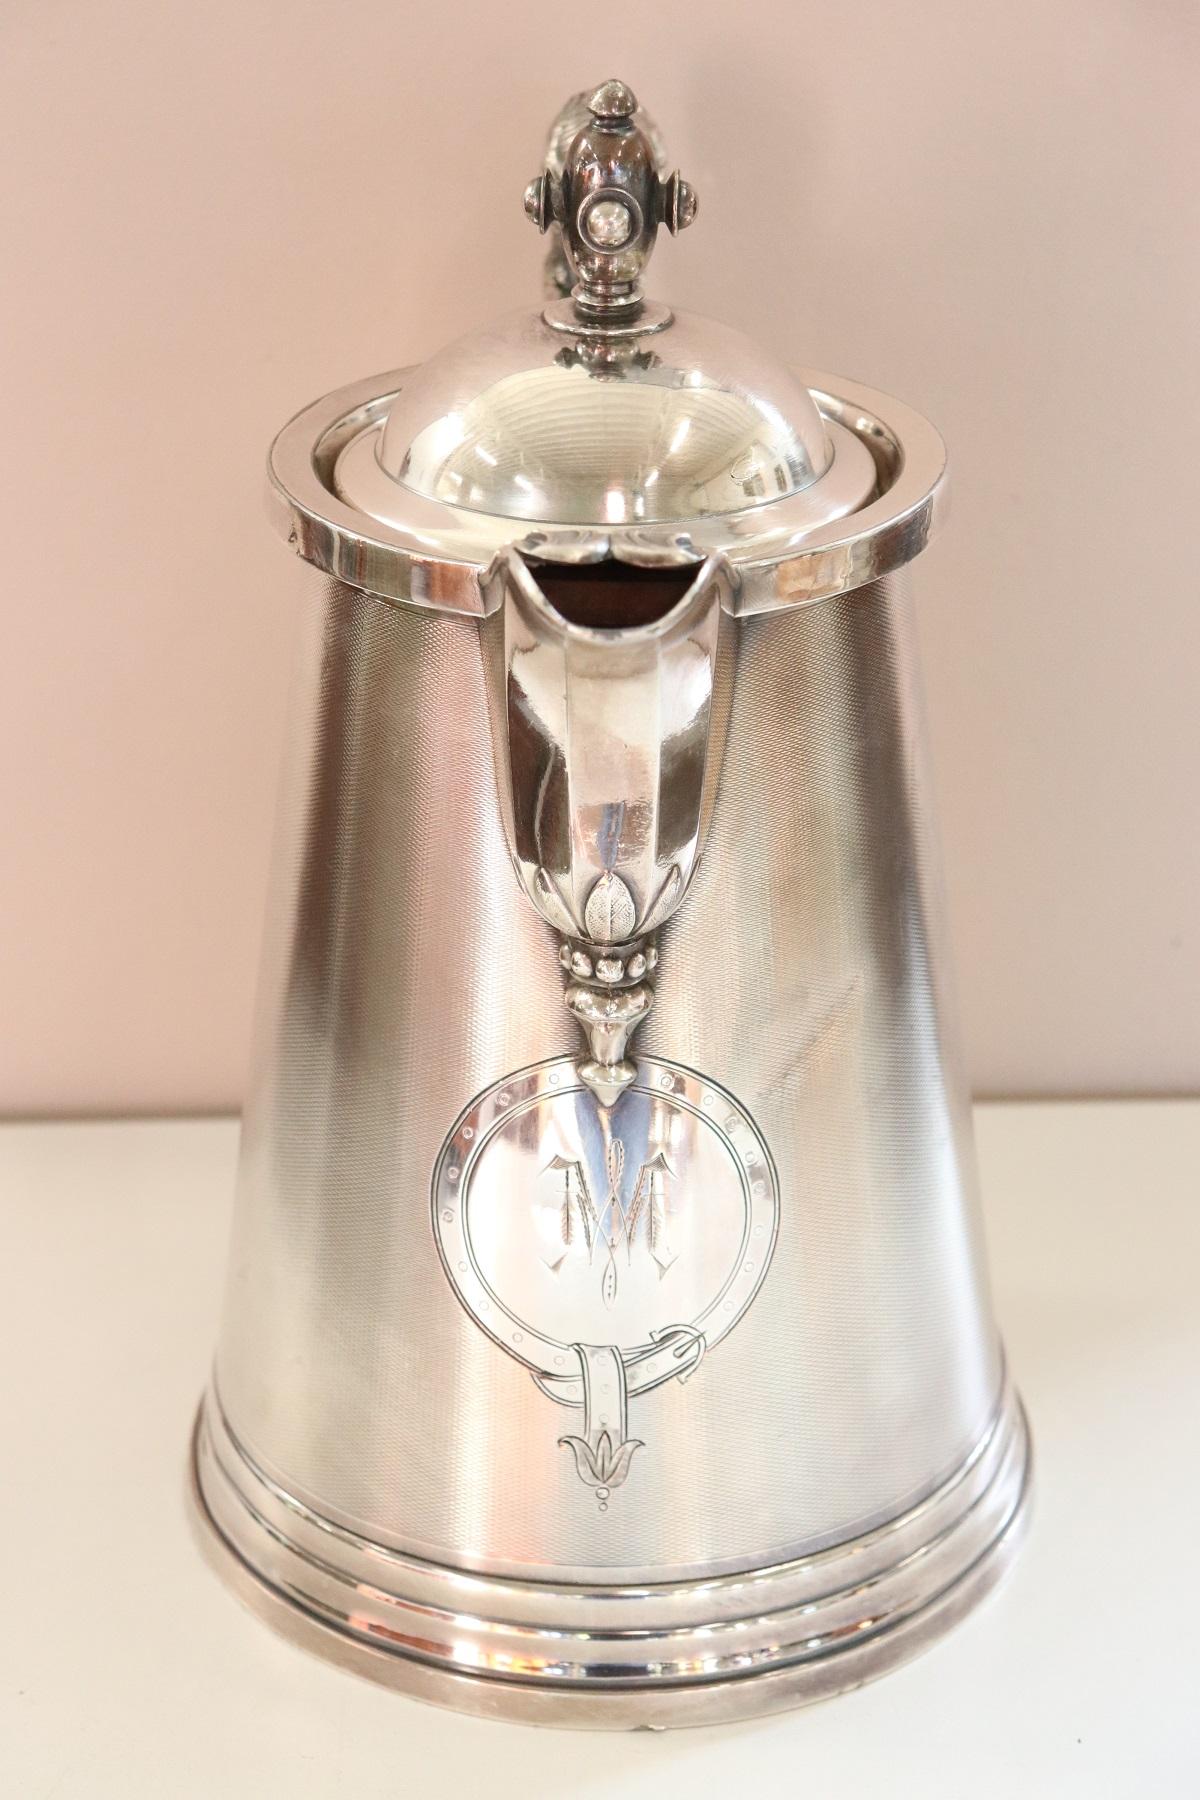 Beautiful American antique silver plate pitcher by Stimpson, 1868. Great chiseling work in the metal look carefully at the refined decoration. On the handle a woman's head. On front engraved two initials probably it was a gift for